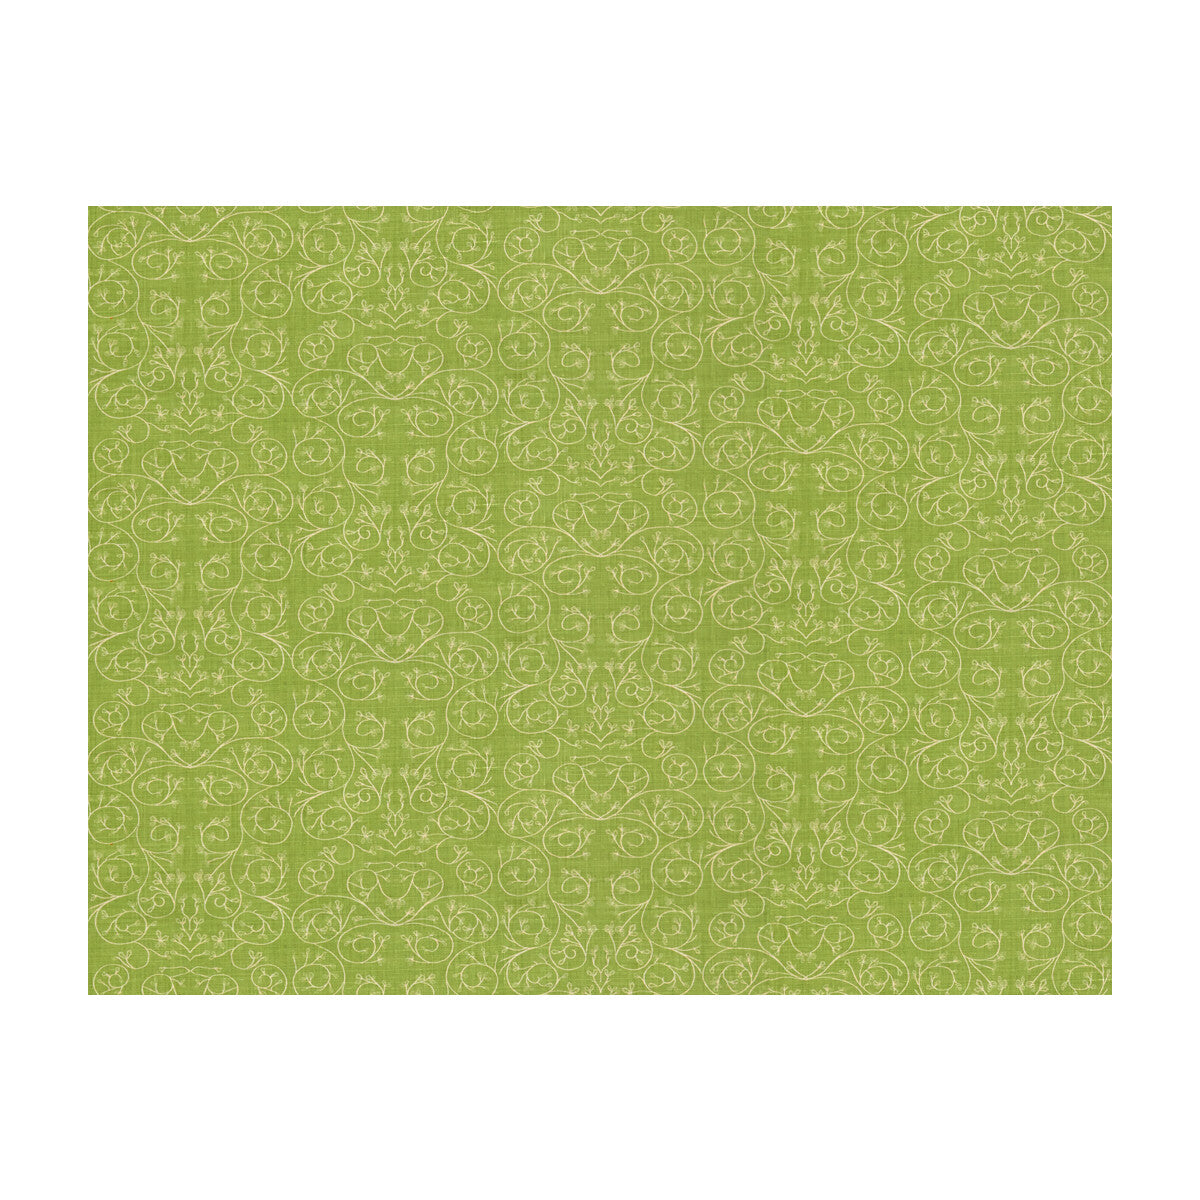 Garden Reverse fabric in meadow color - pattern GWF-3512.3.0 - by Lee Jofa Modern in the Allegra Hicks Garden collection